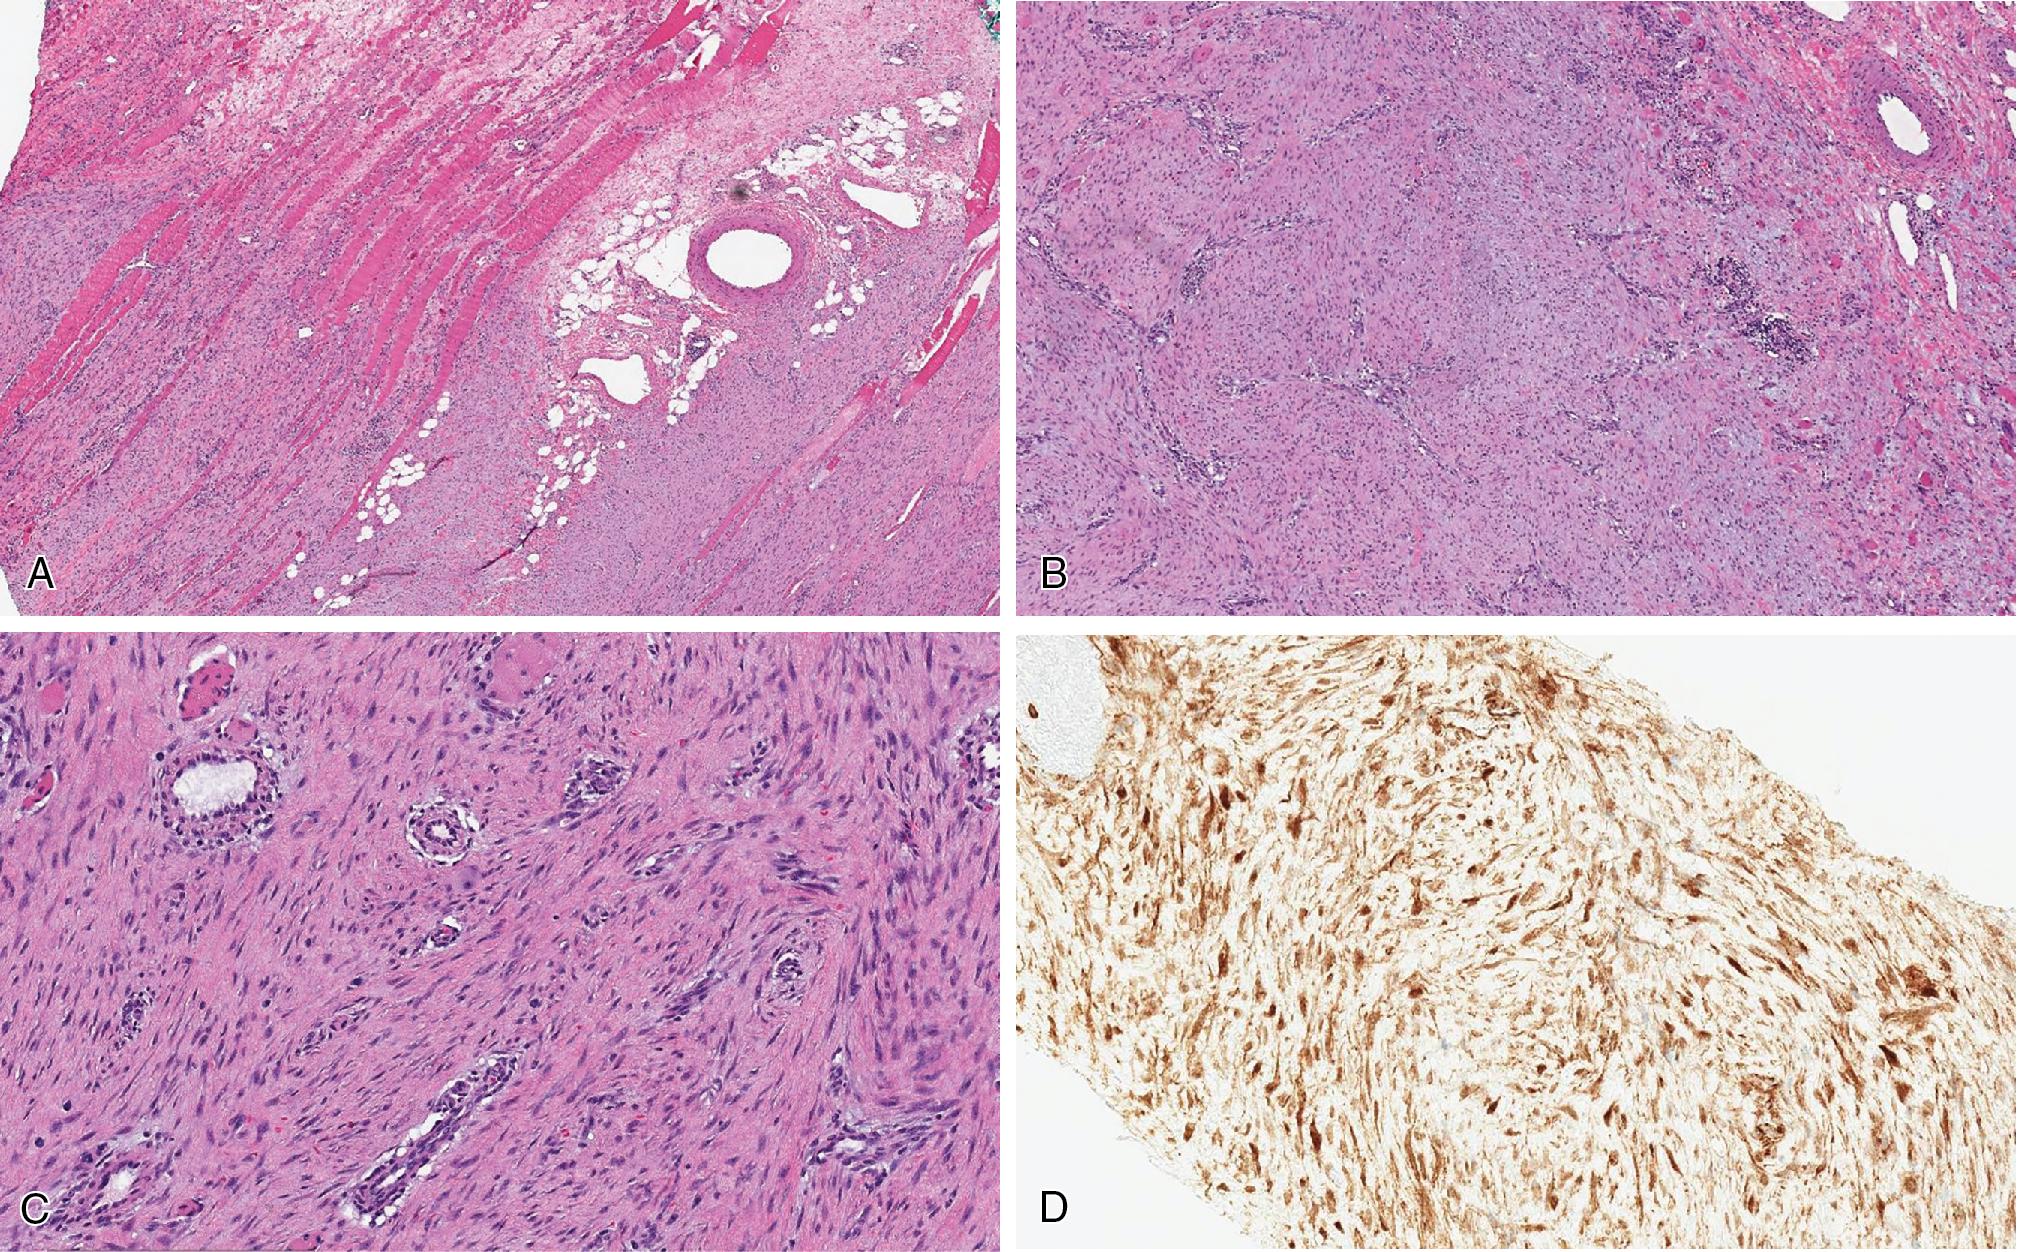 Fig. 8.23, Desmoid fibromatosis with long sweeping fascicles infiltrating the surrounding soft tissues and skeletal muscle (A) , often accompanied by lymphoid aggregates, peripherally (B) . The background stroma is usually uniformly collagenous with thin-walled blood vessels and characteristic perivascular edema (C) . Nuclear beta-catenin positivity may be helpful but is often inconsistently expressed (D) .